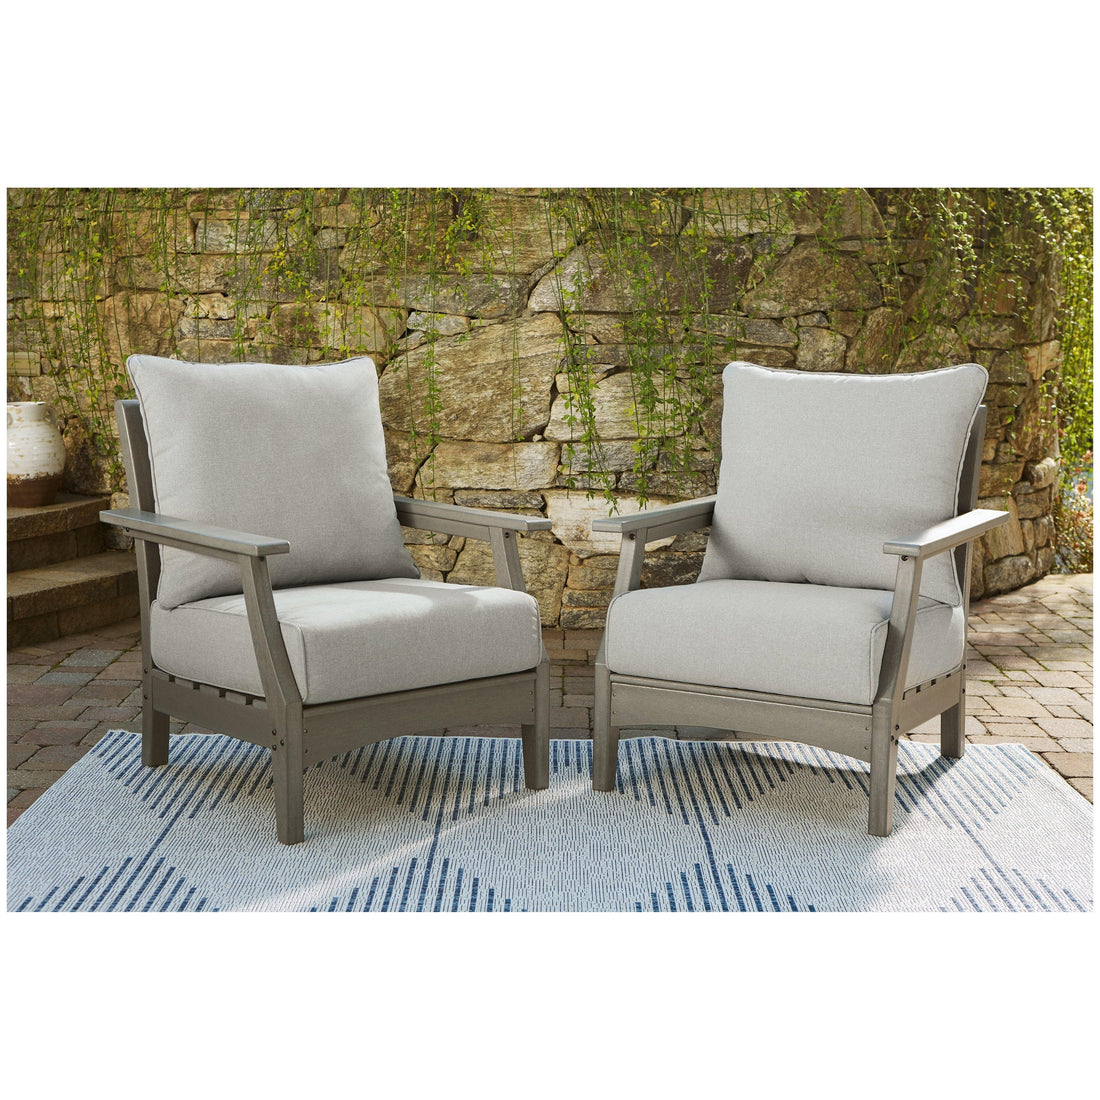 Visola Lounge Chair with Cushion (Set of 2) Ash-P802-820